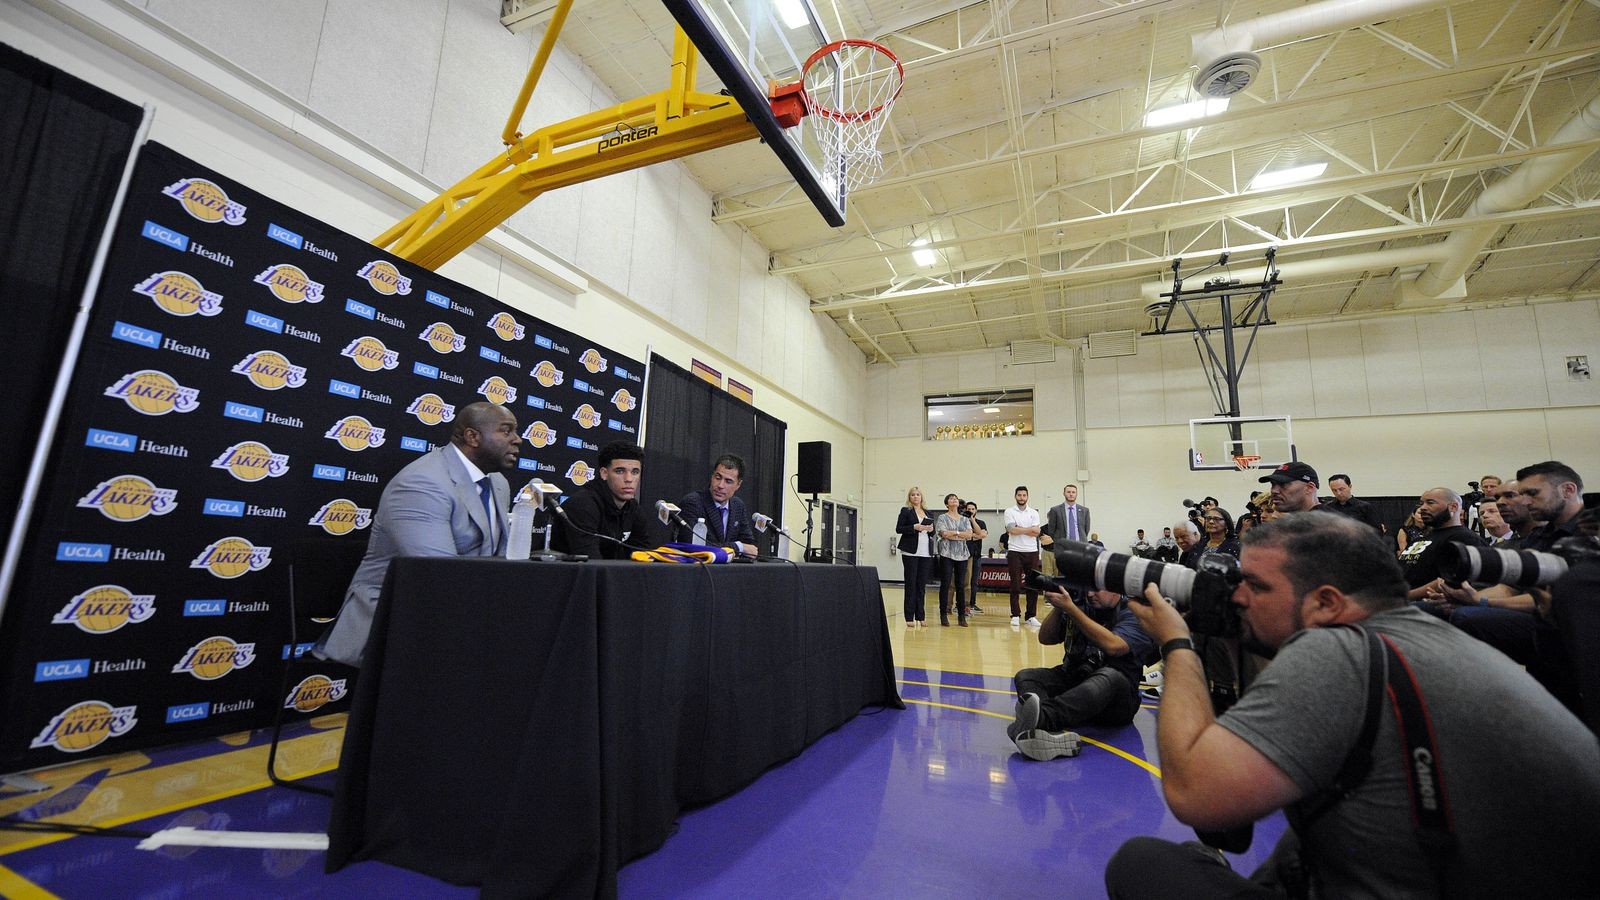 Check out the Lakers’ incredible new training facility and headquarters